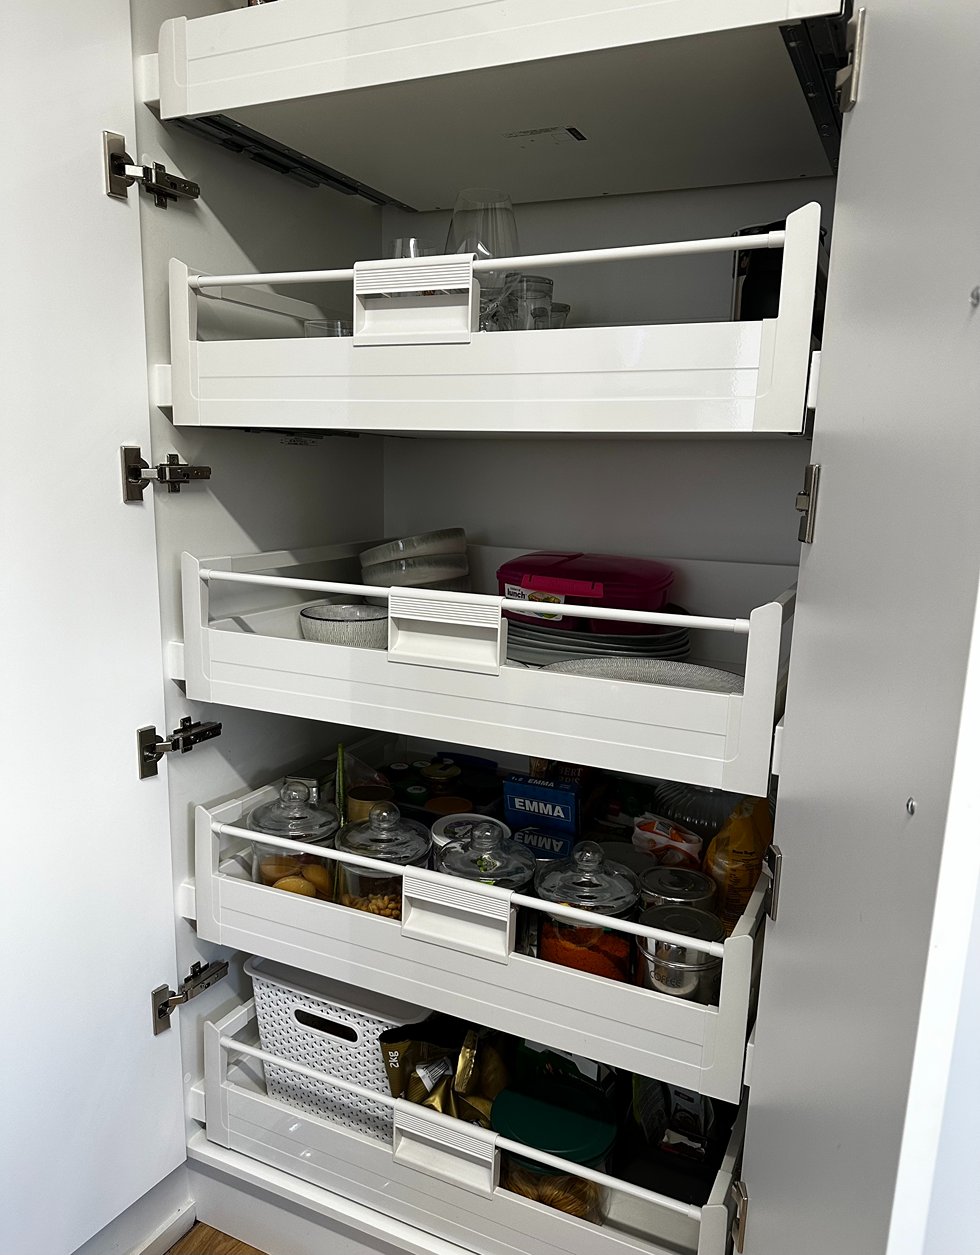 Pantry with Neat internal drawers